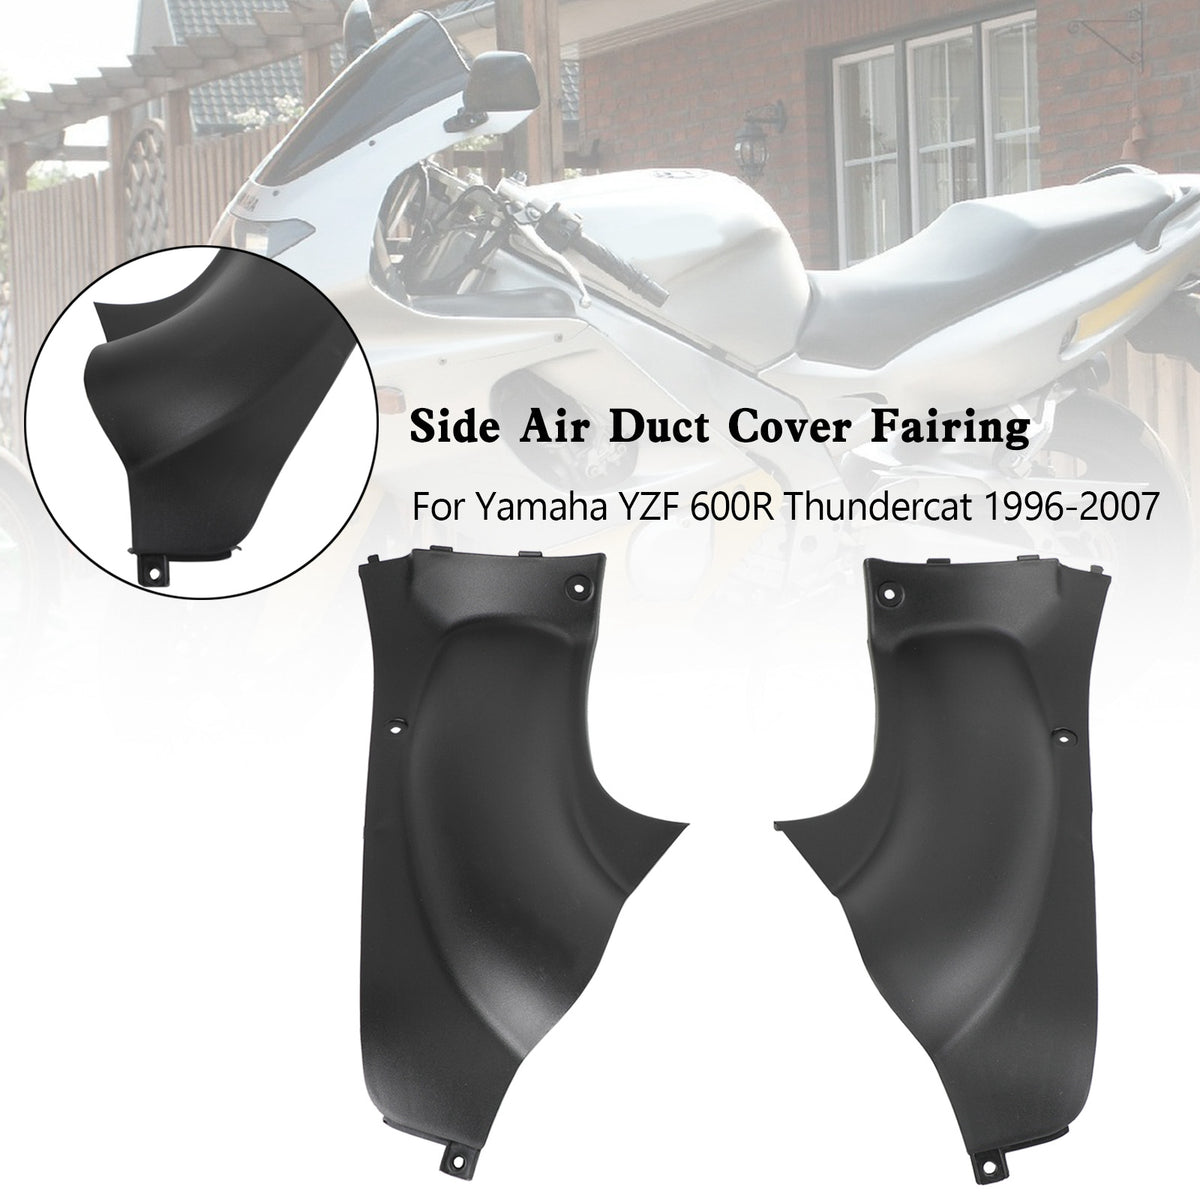 Side Air Duct Cover Panel Fairing For Yamaha YZF600 R Thundercat 1996-2007